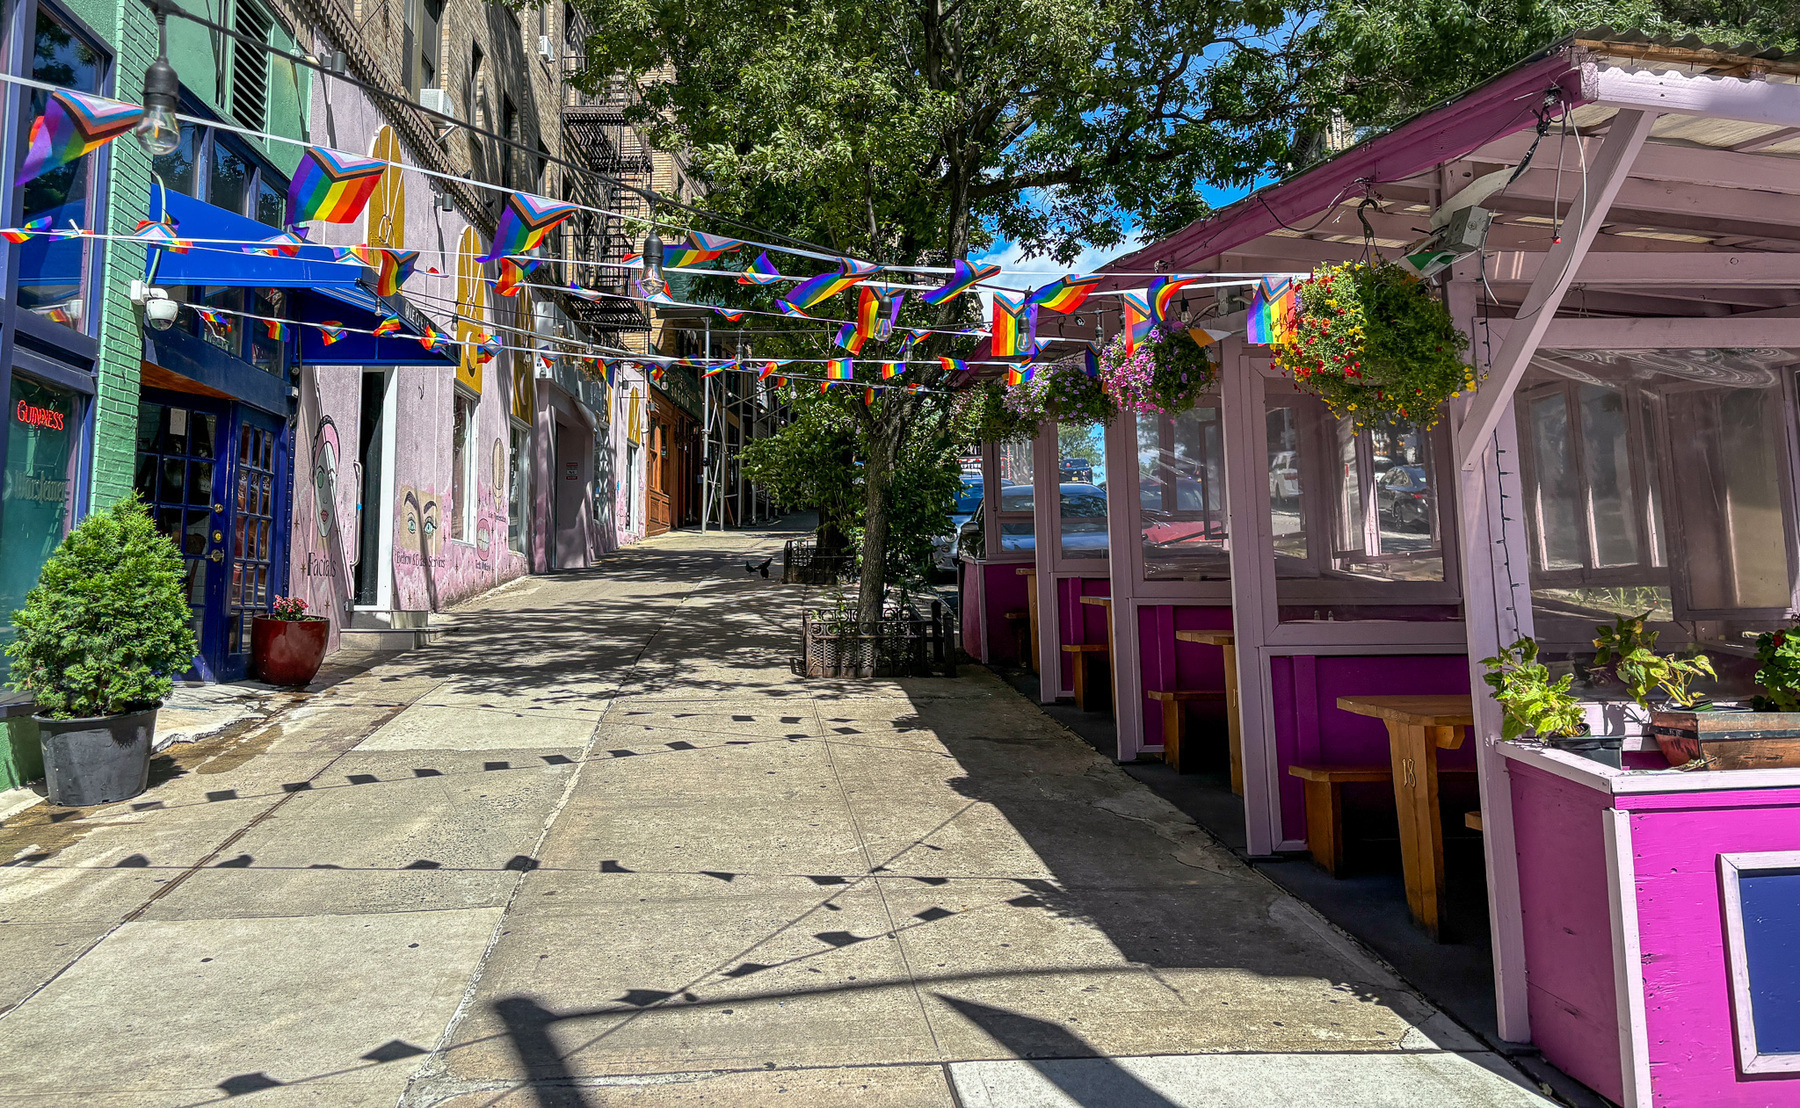 A colorful outdoor cafe with rainbow flags and vibrant decorations lines a pedestrian walkway under a clear blue sky.